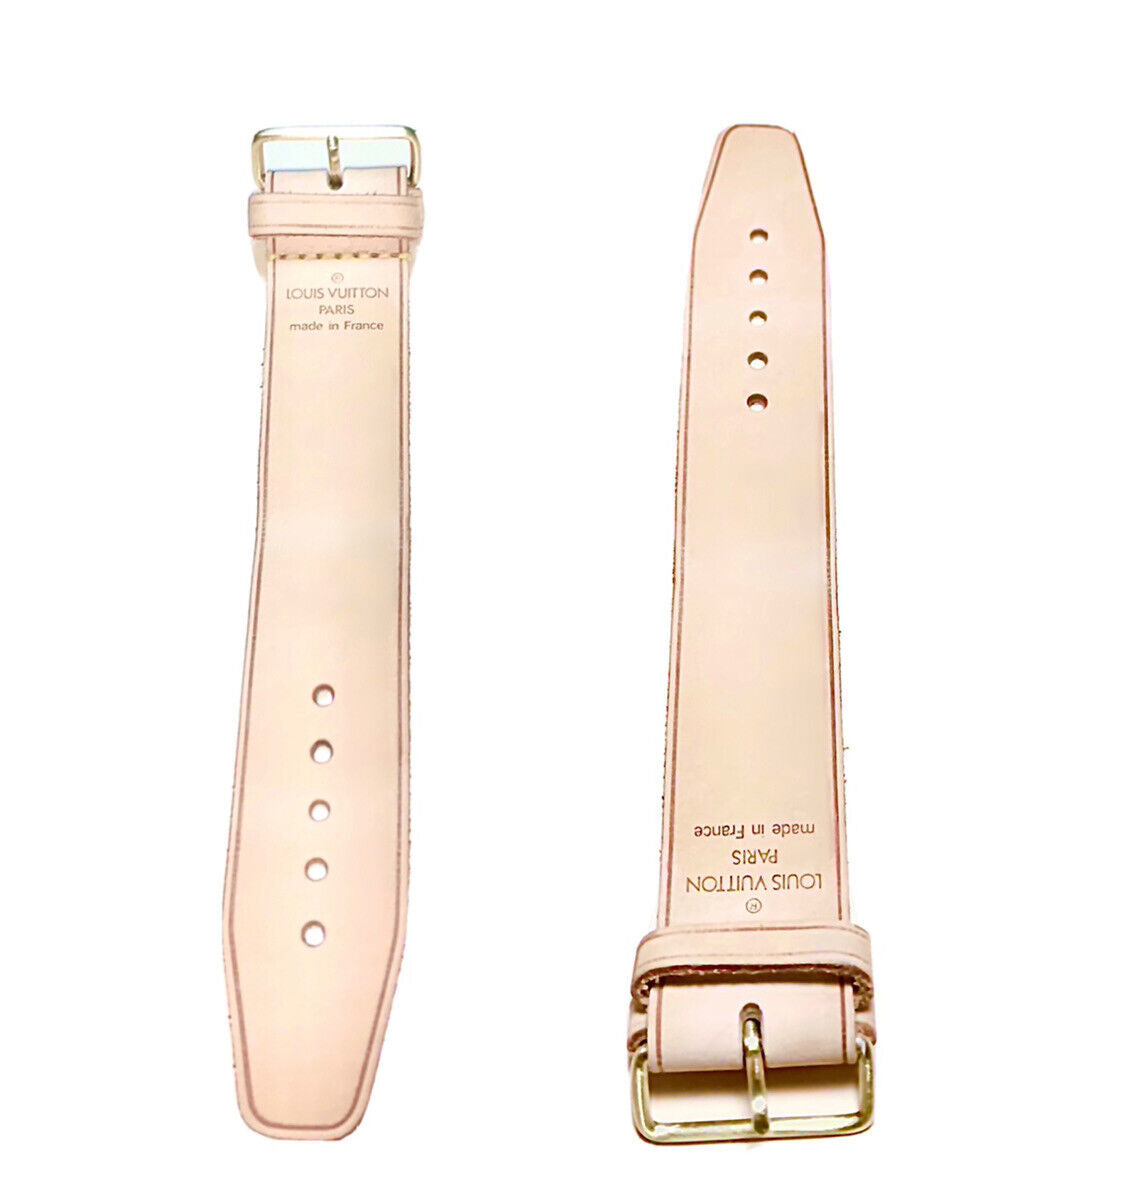 Louis Vuitton Short Leather Strap - Redone Authentic Light color for Keepall